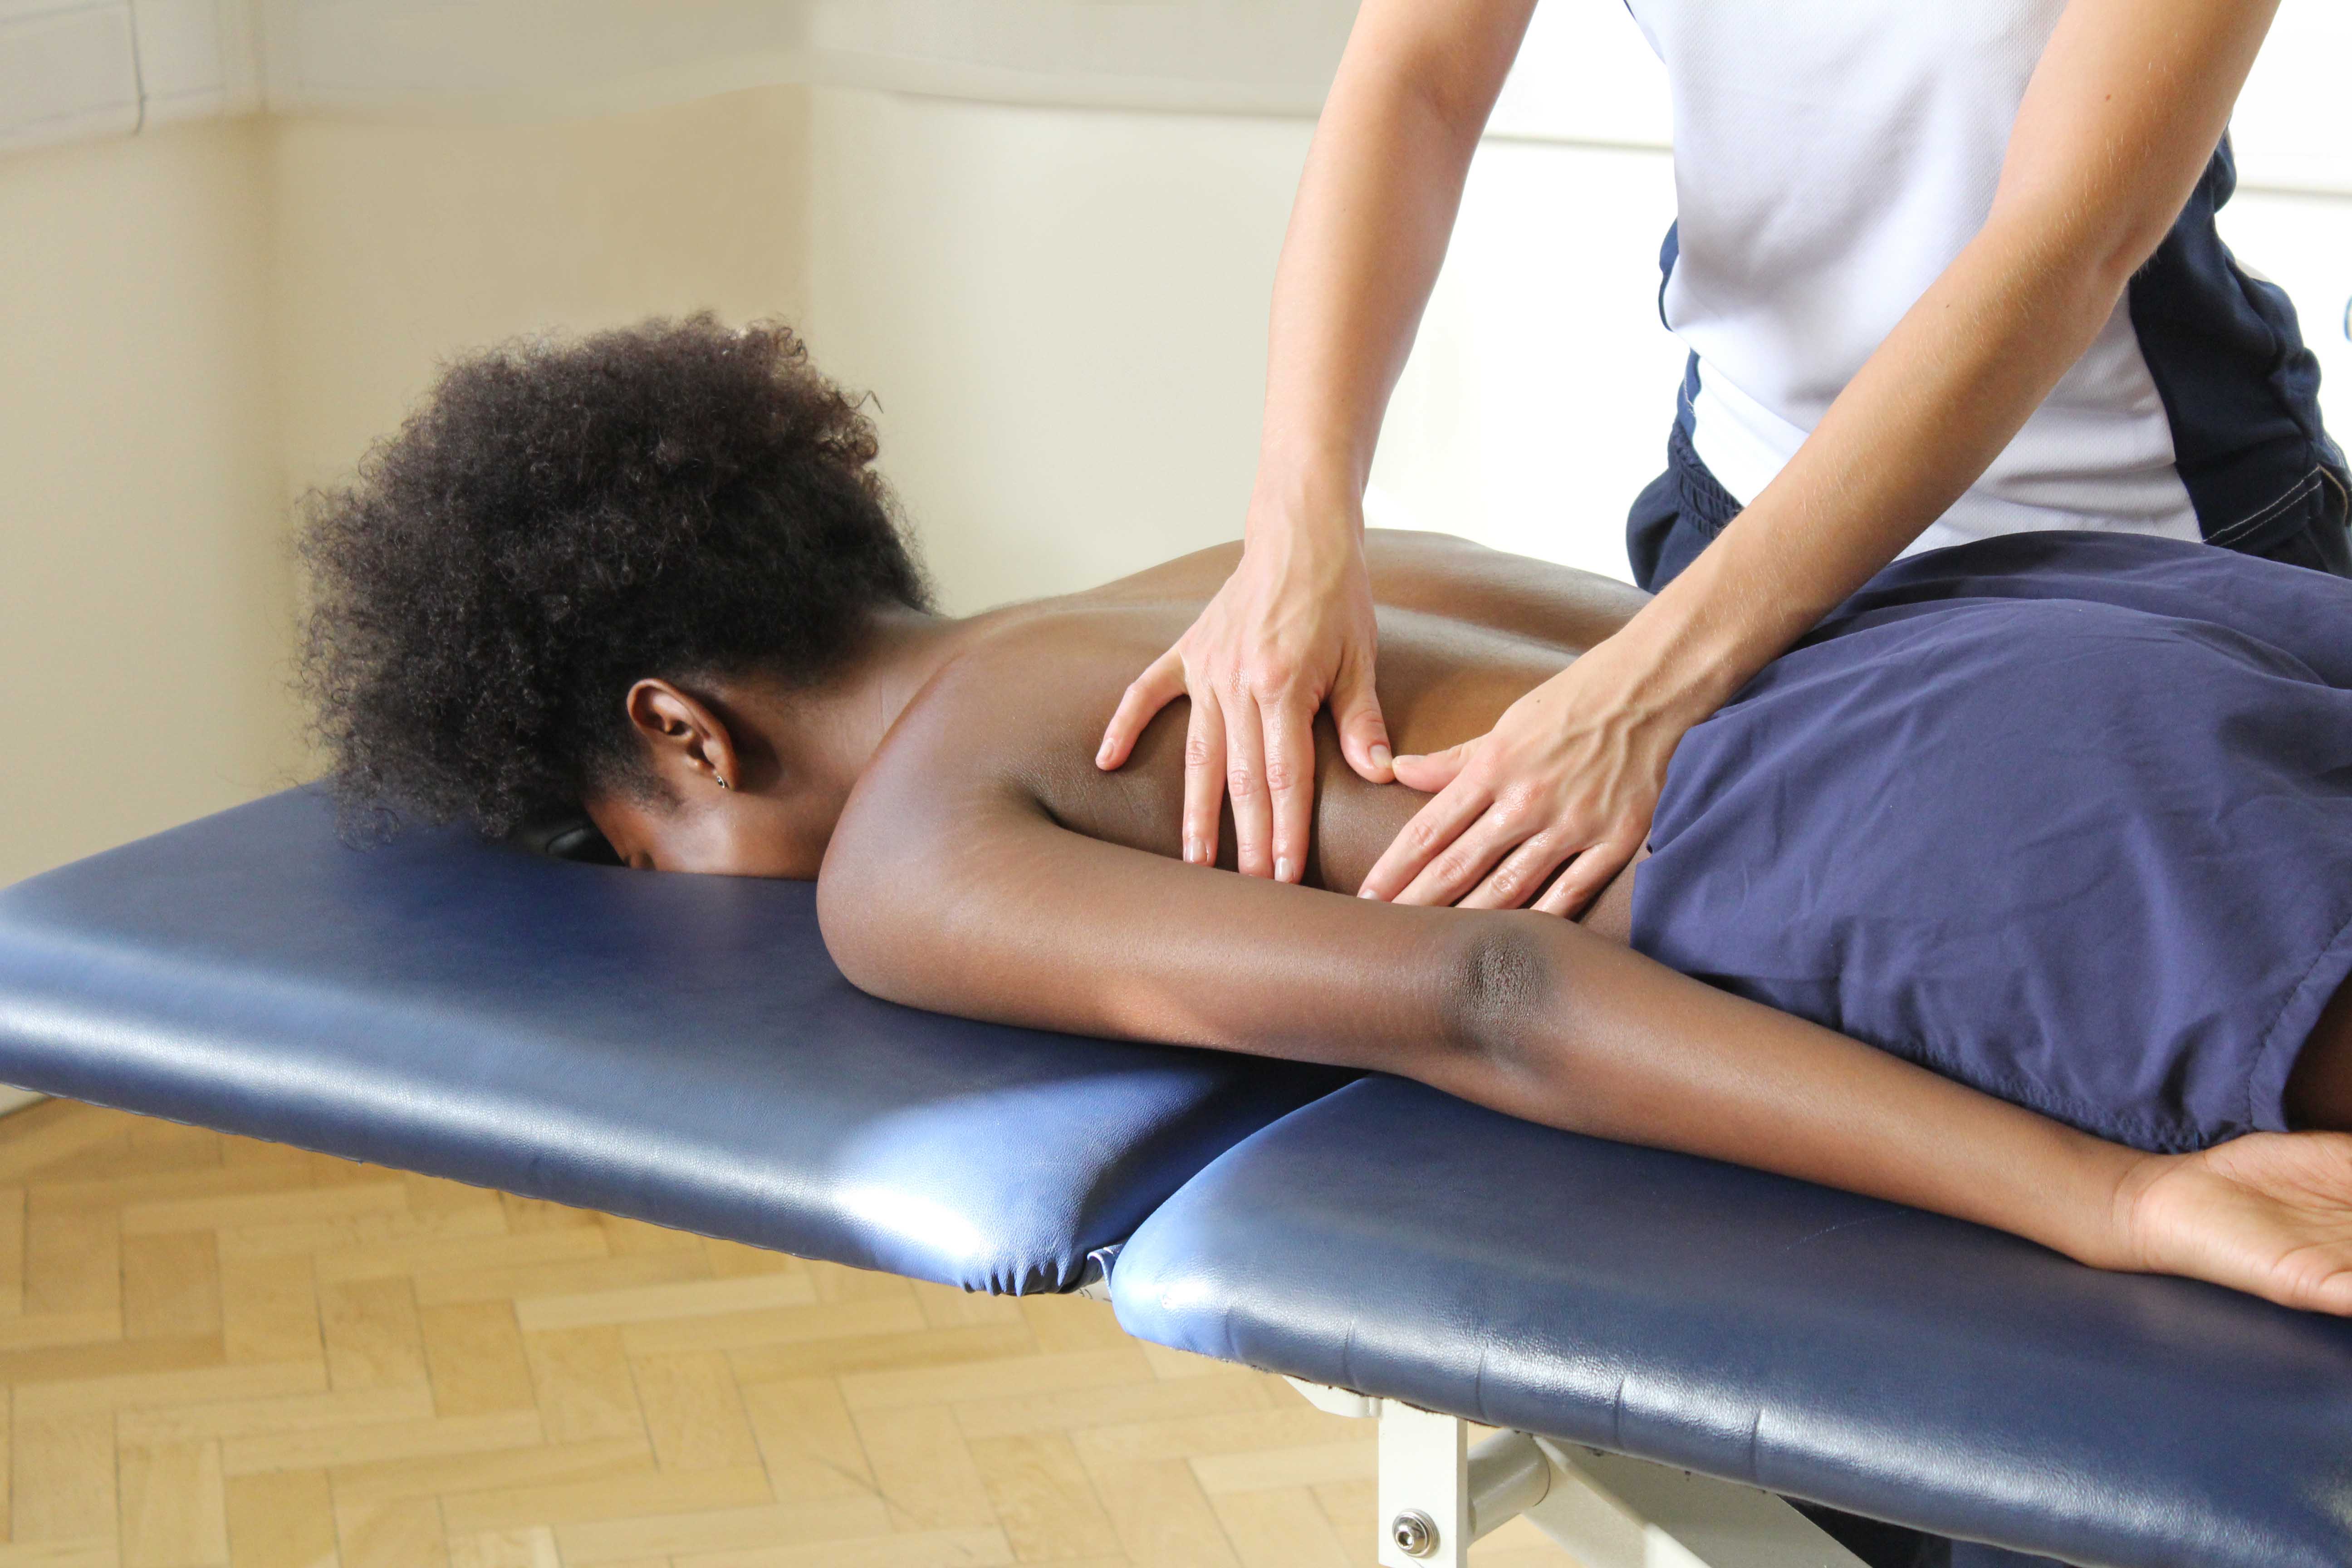 Rolling soft tissue massage of the lower back to relieve stiffness and reduce muscle spasm